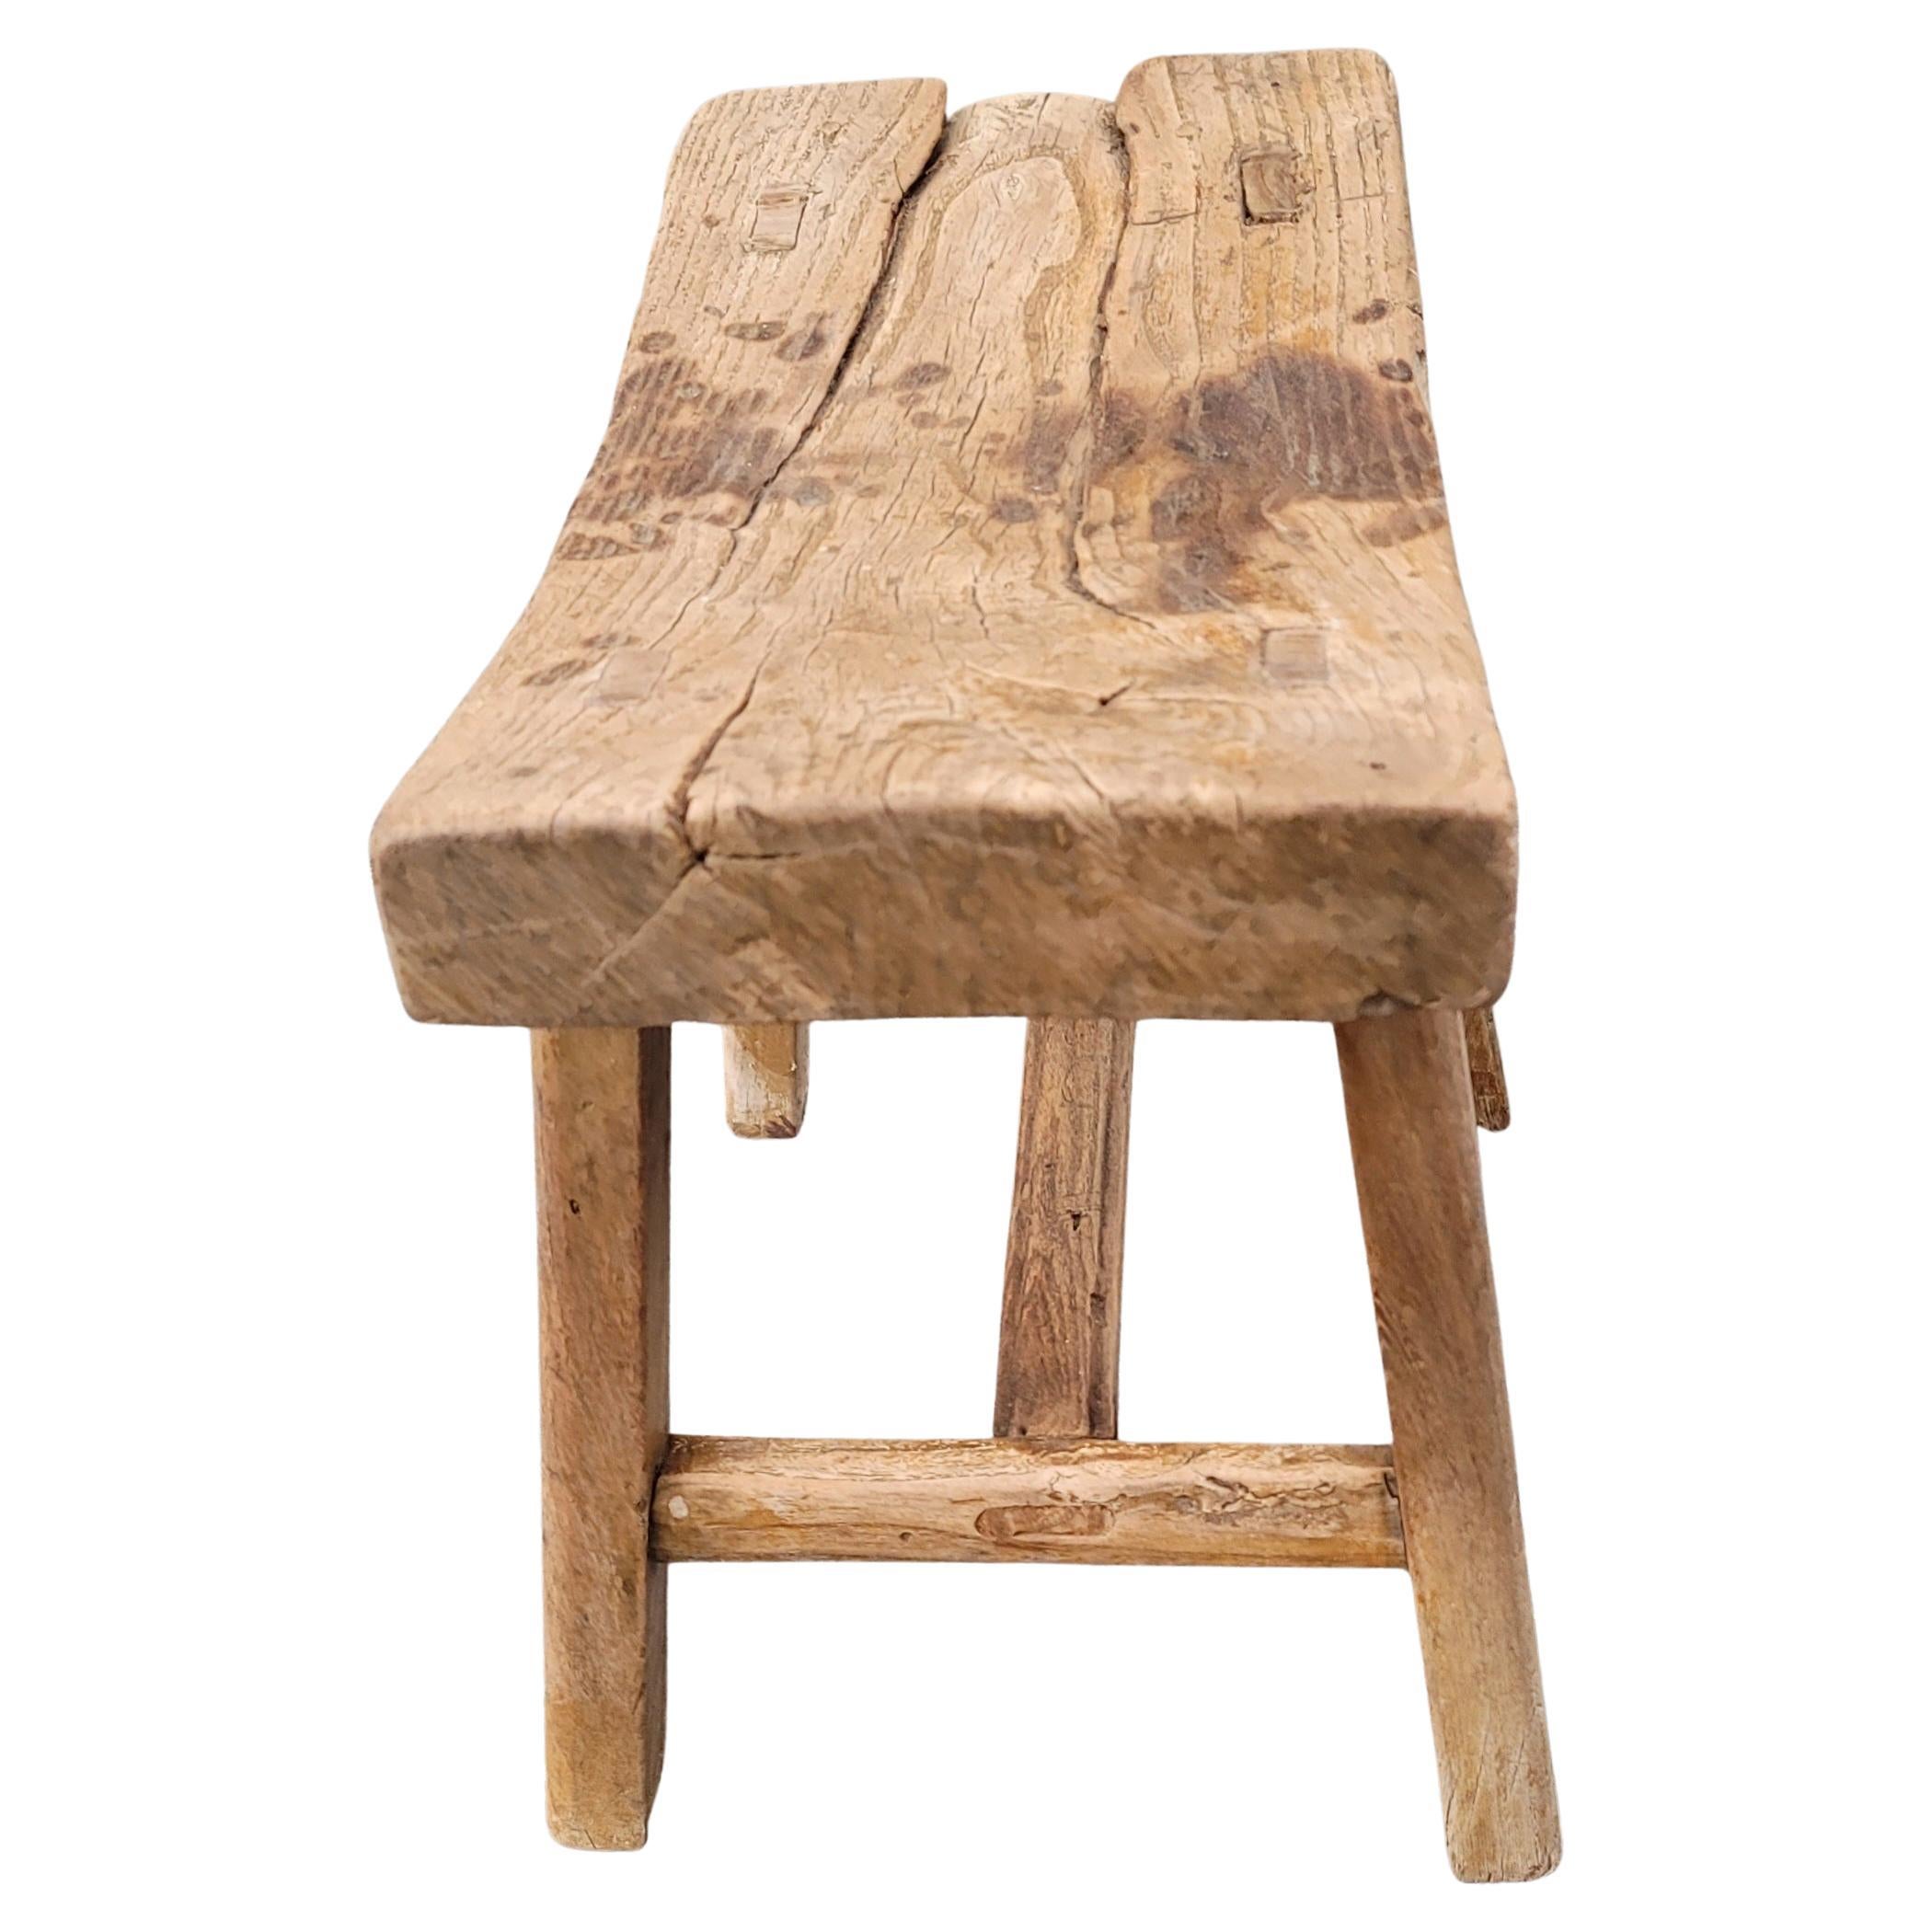 19th Century Chinese Elm Rustic Primitive Brutalist Stool For Sale 1